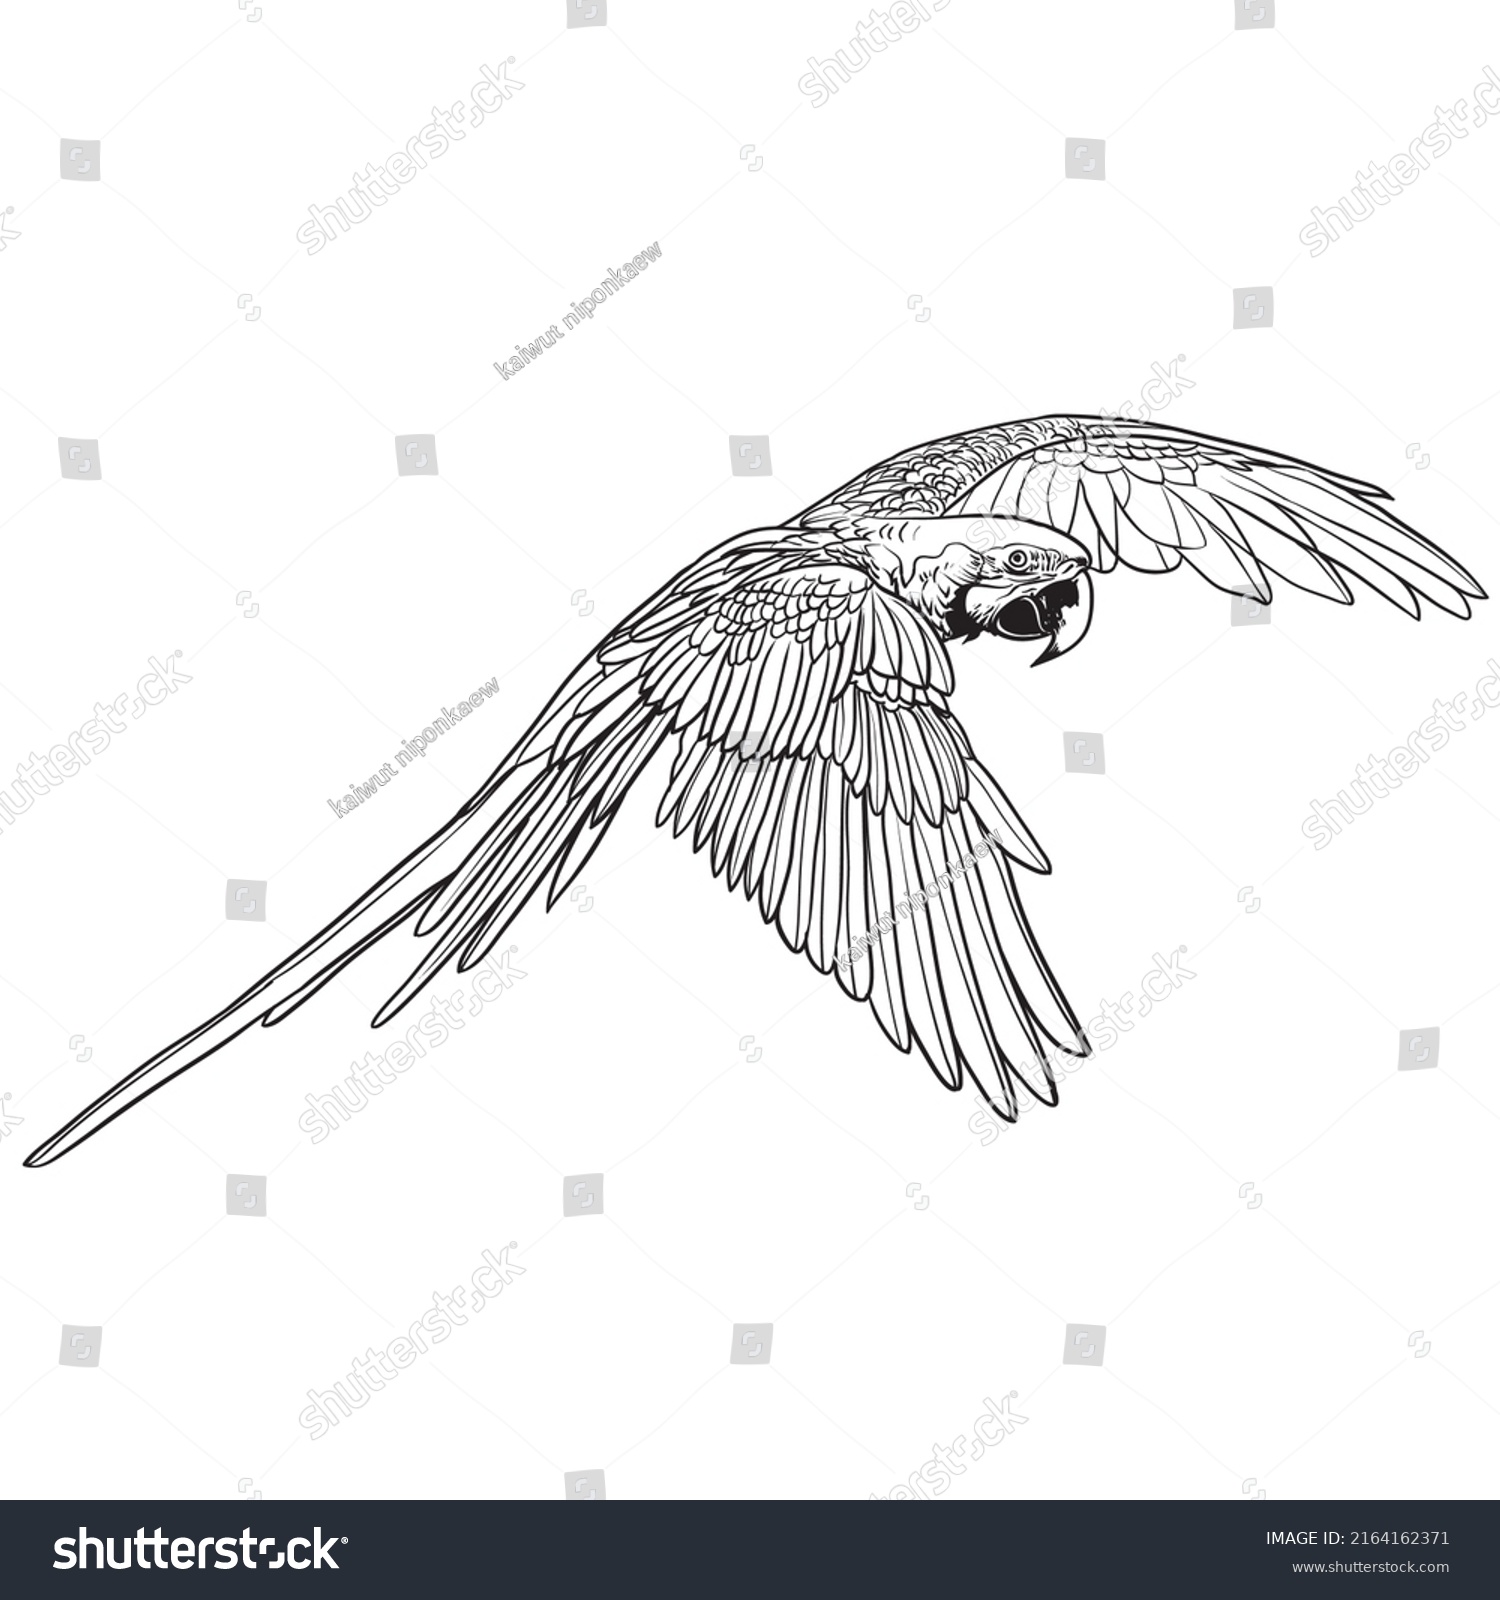 Macaw Parrot Flight Hand Drawn Engraved Stock Vector (Royalty Free ...